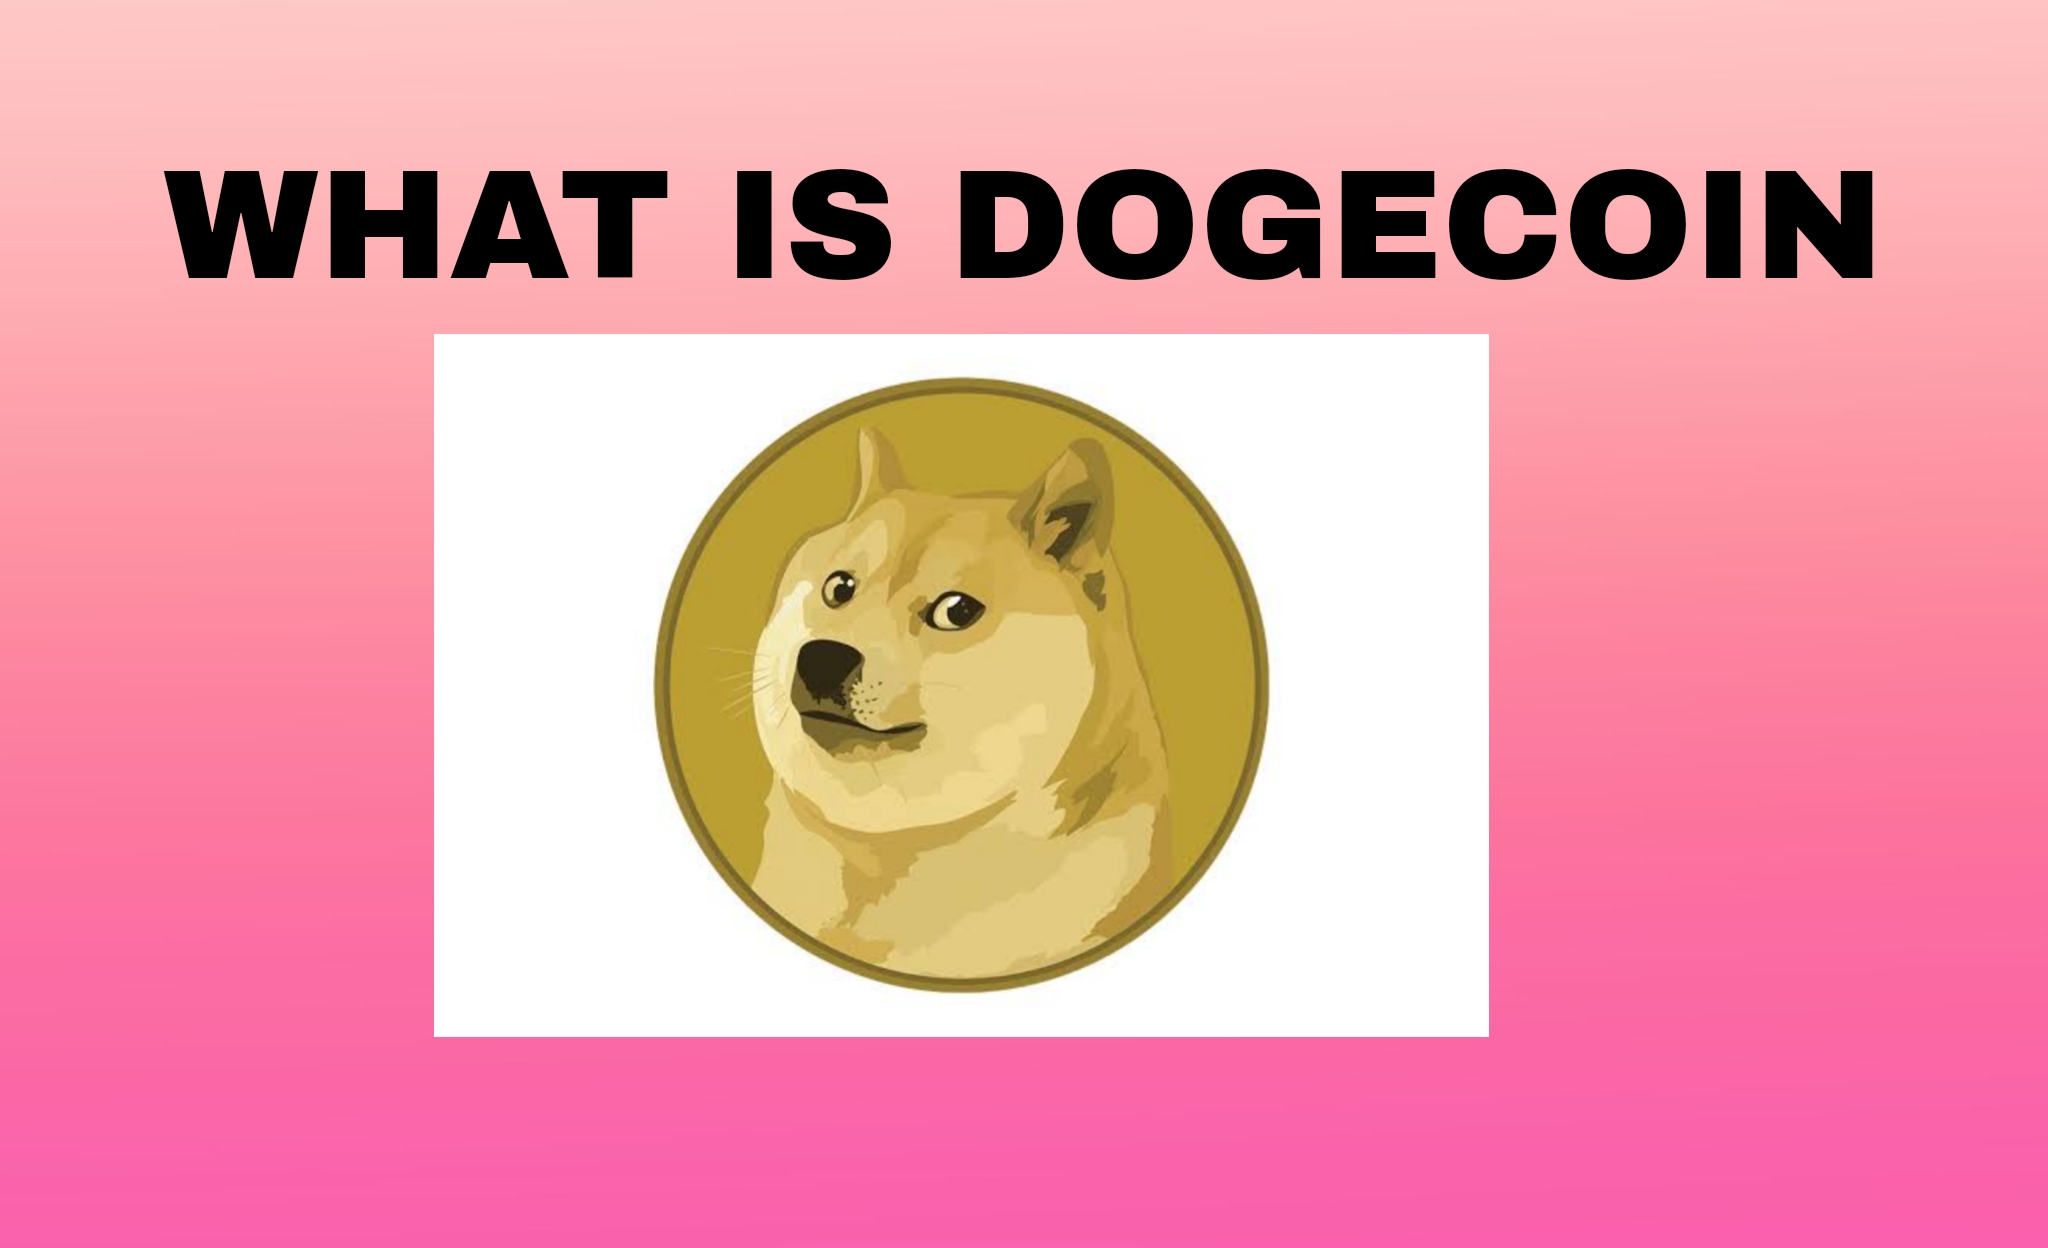 What is Dogecoin? How do I buy Dogecoin?